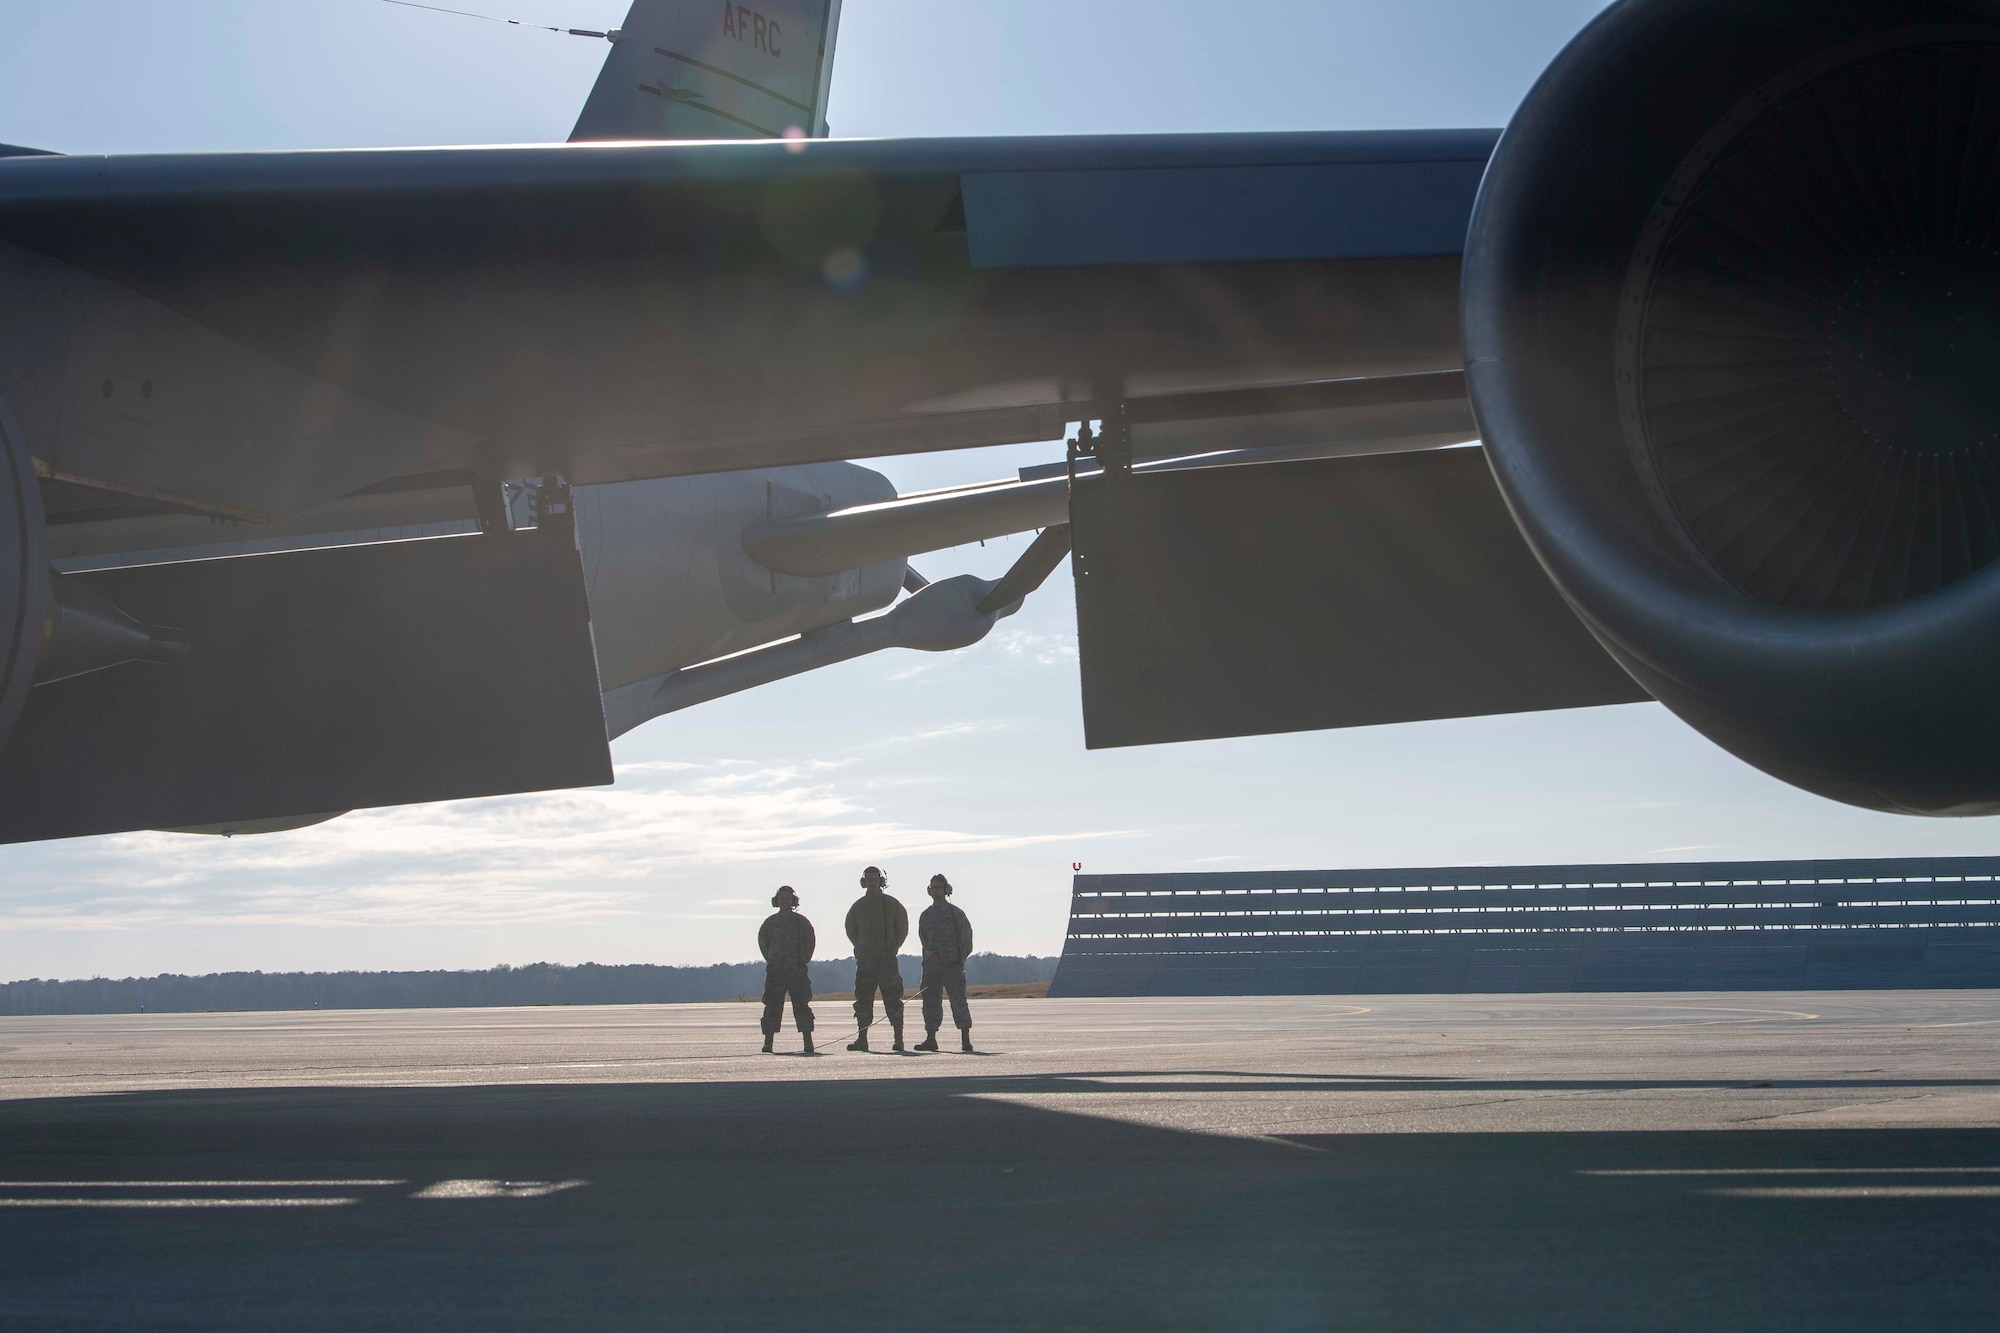 U.S. Air Force Staff Sgt. Irang K. McClellan, Staff Sgt. Jose A. Reyes and Airman 1st Class Edwin Rodriguez, all 911th Air Refueling Squadron (ARS) dedicated crew chiefs, stand in the distance as they conduct pre-flight checks before takeoff from Seymour Johnson Air Force Base, North Carolina, Dec. 12, 2019. The 911 ARS prepared for their final mission in KC-135 Stratotanker. (U.S. Air Force photo by Staff Sgt. Mary McKnight)